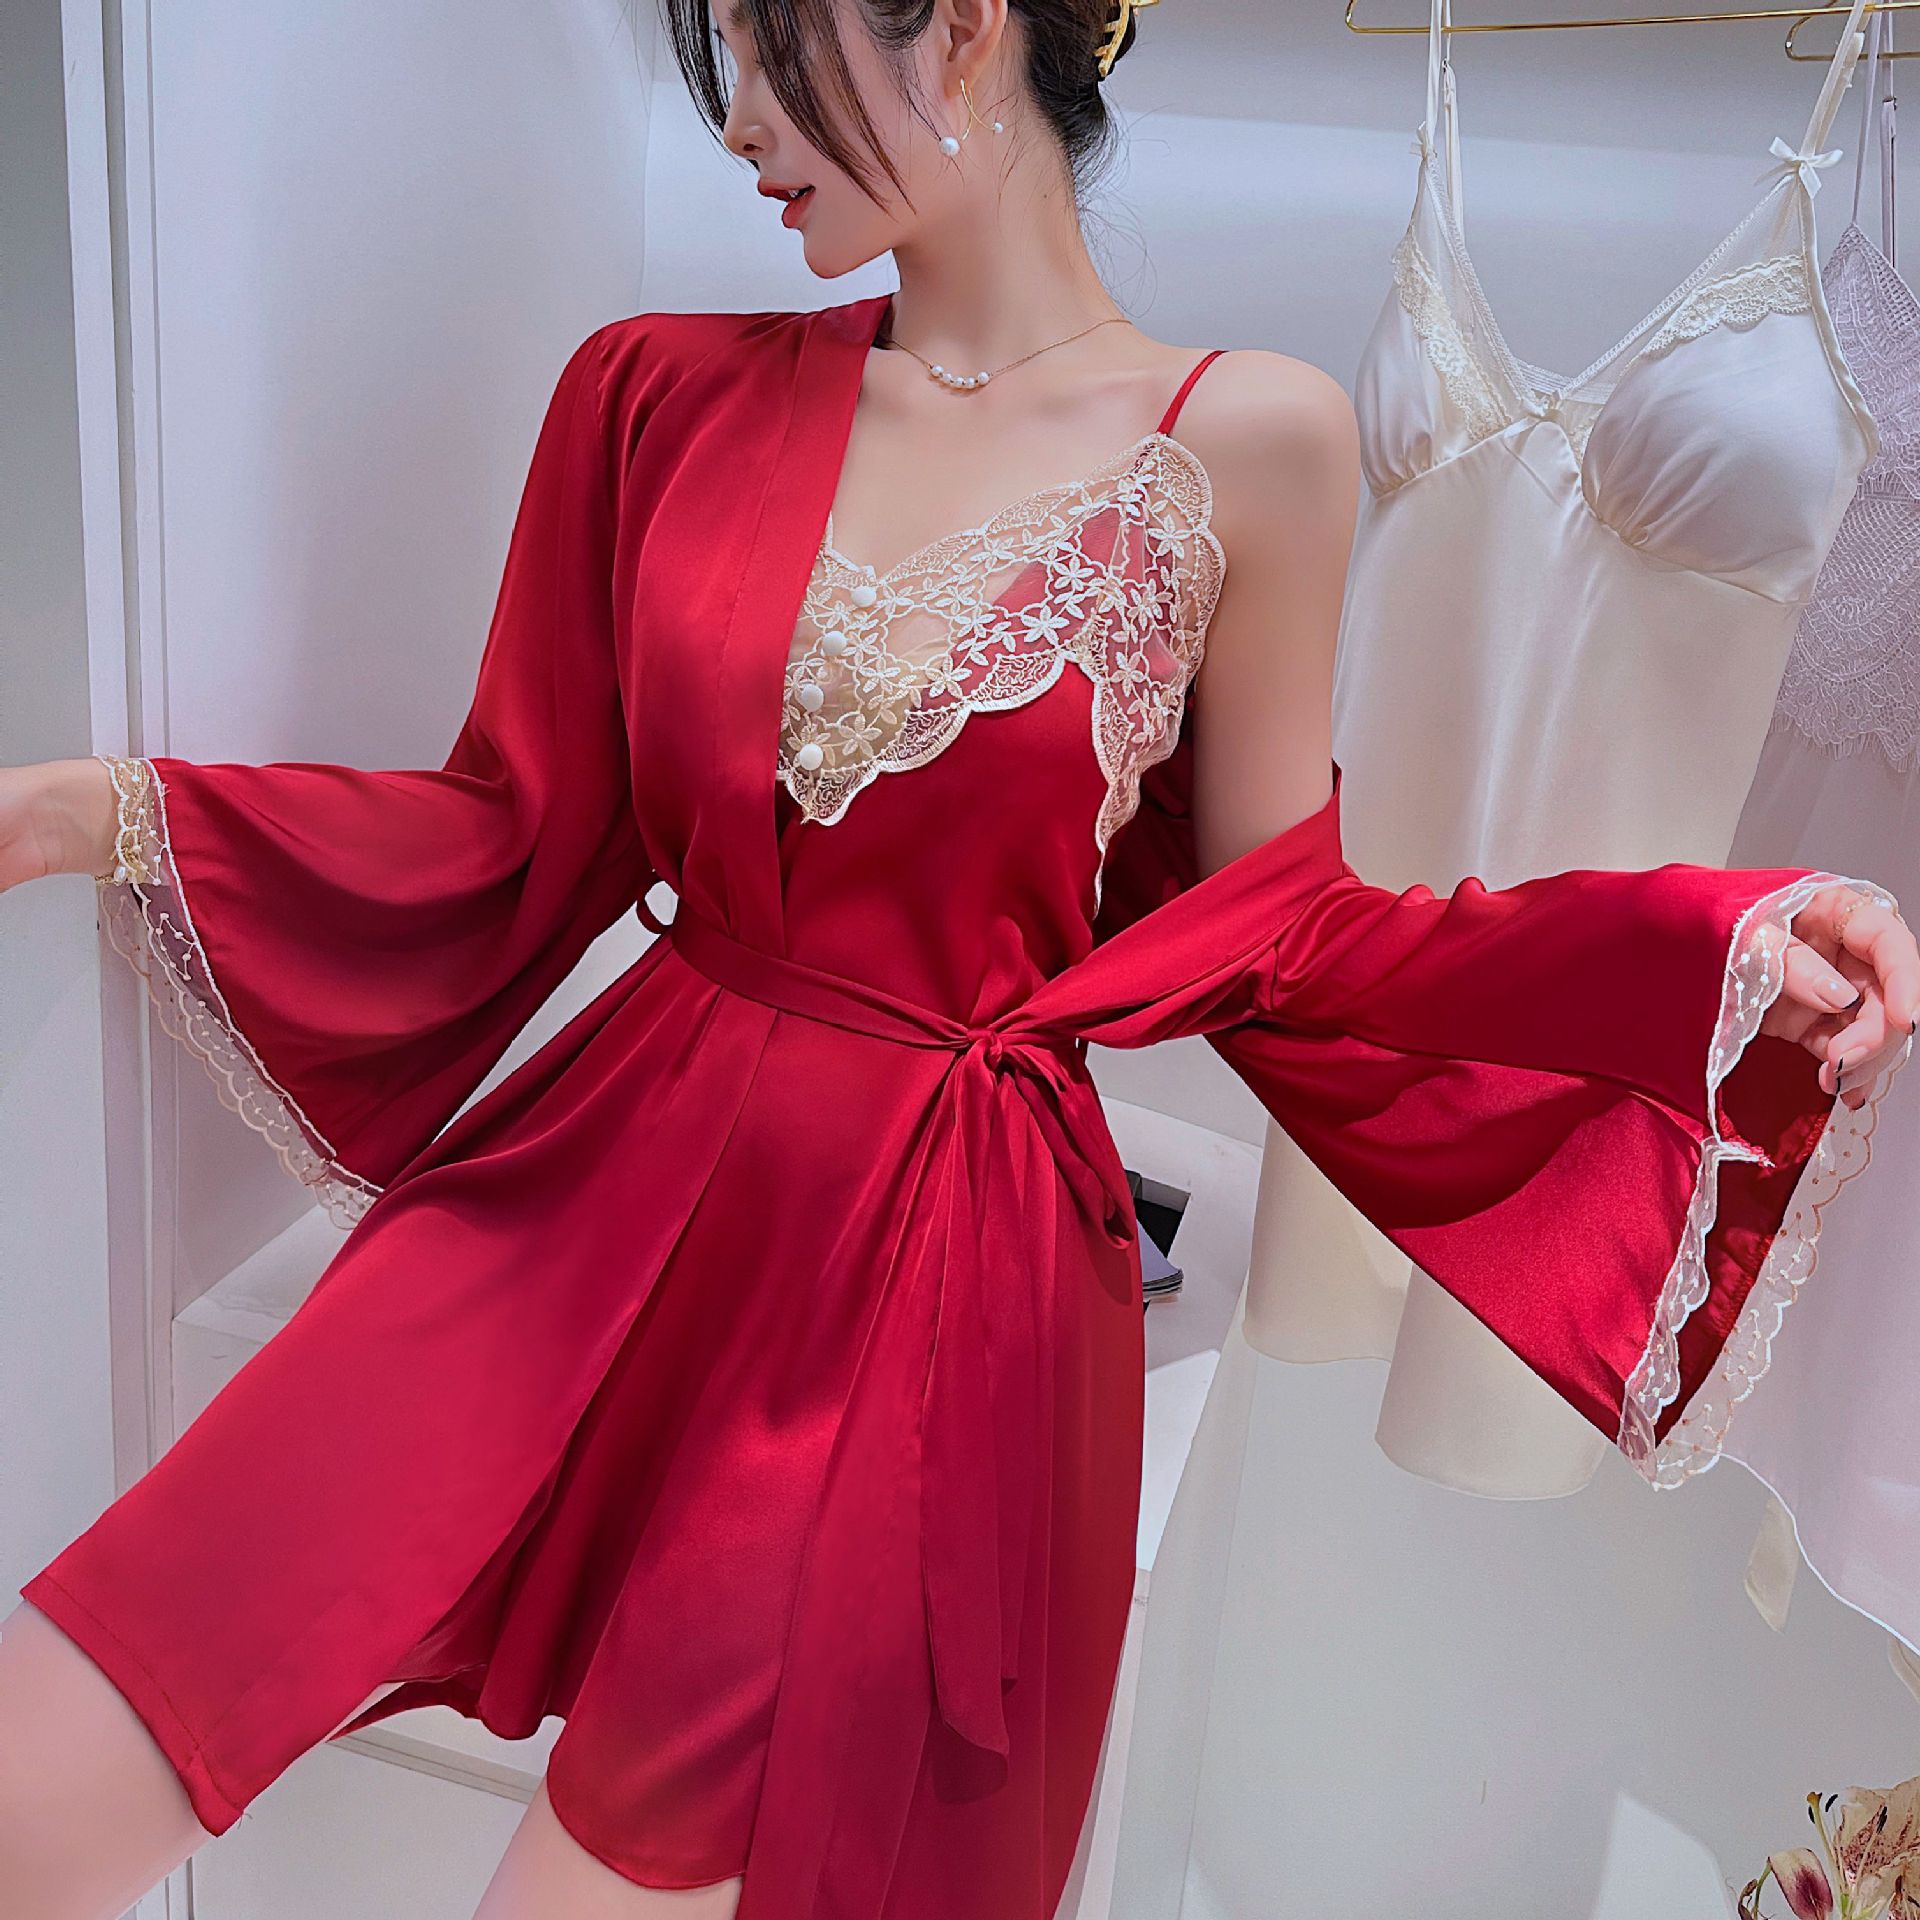 pajamas women‘s spring and summer new emulation silk nightgown long sleeve sexy sling nightdress women‘s ice silk palace style home wear